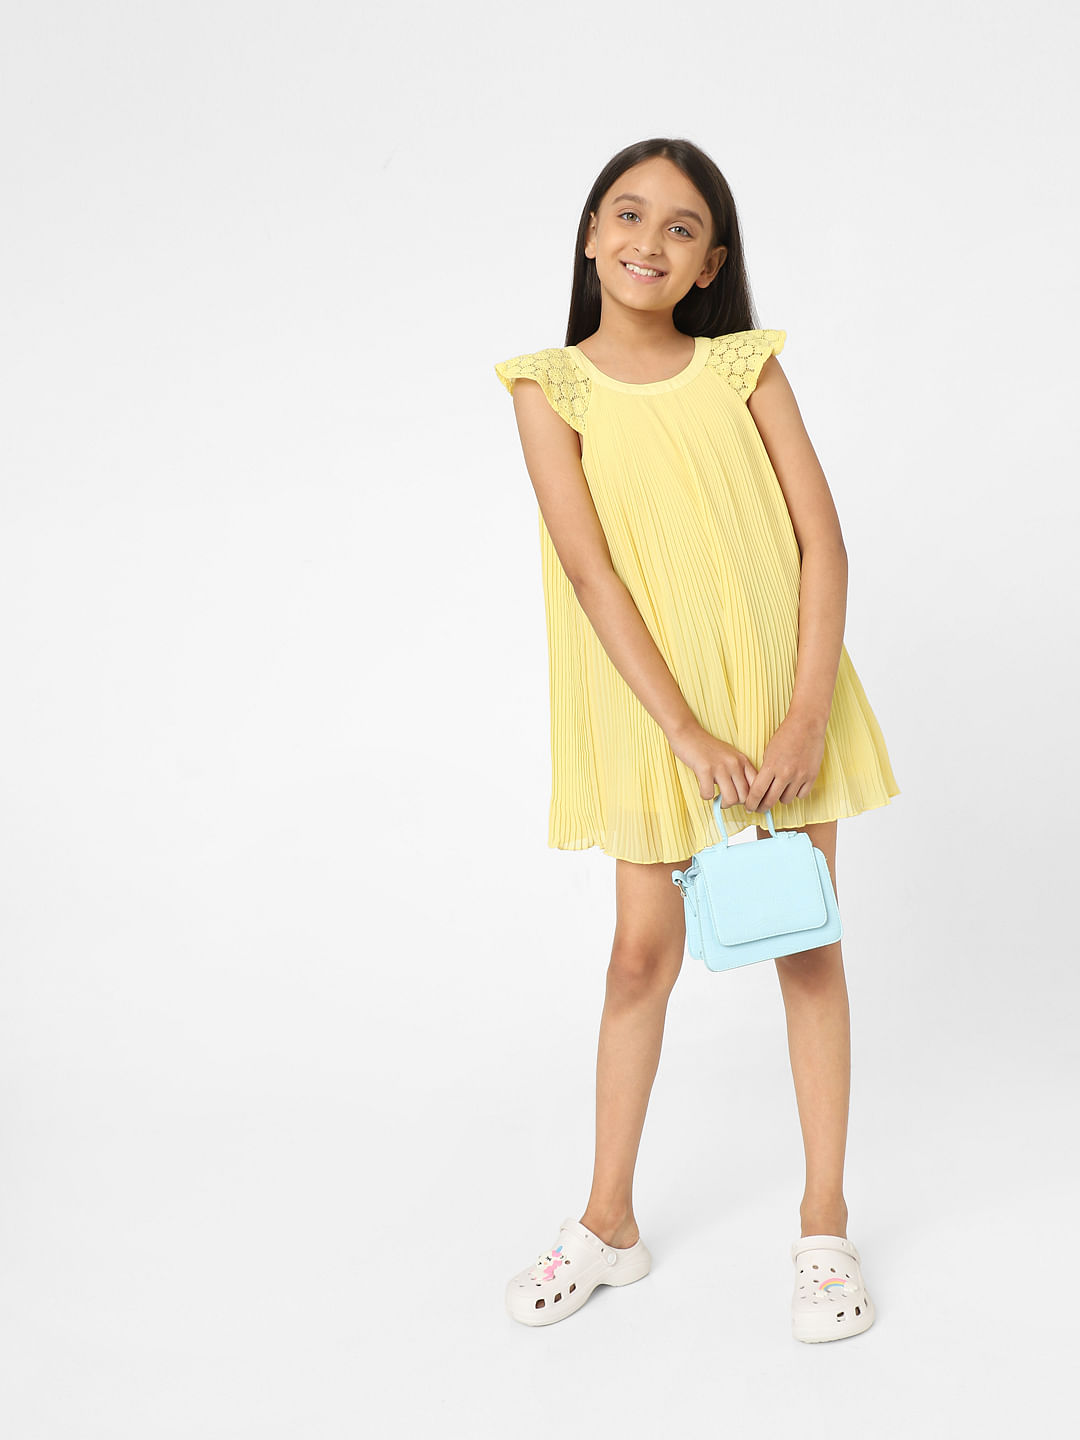 Buy Yellow Lace Dress for Girls Online at KIDS ONLY | 225518502